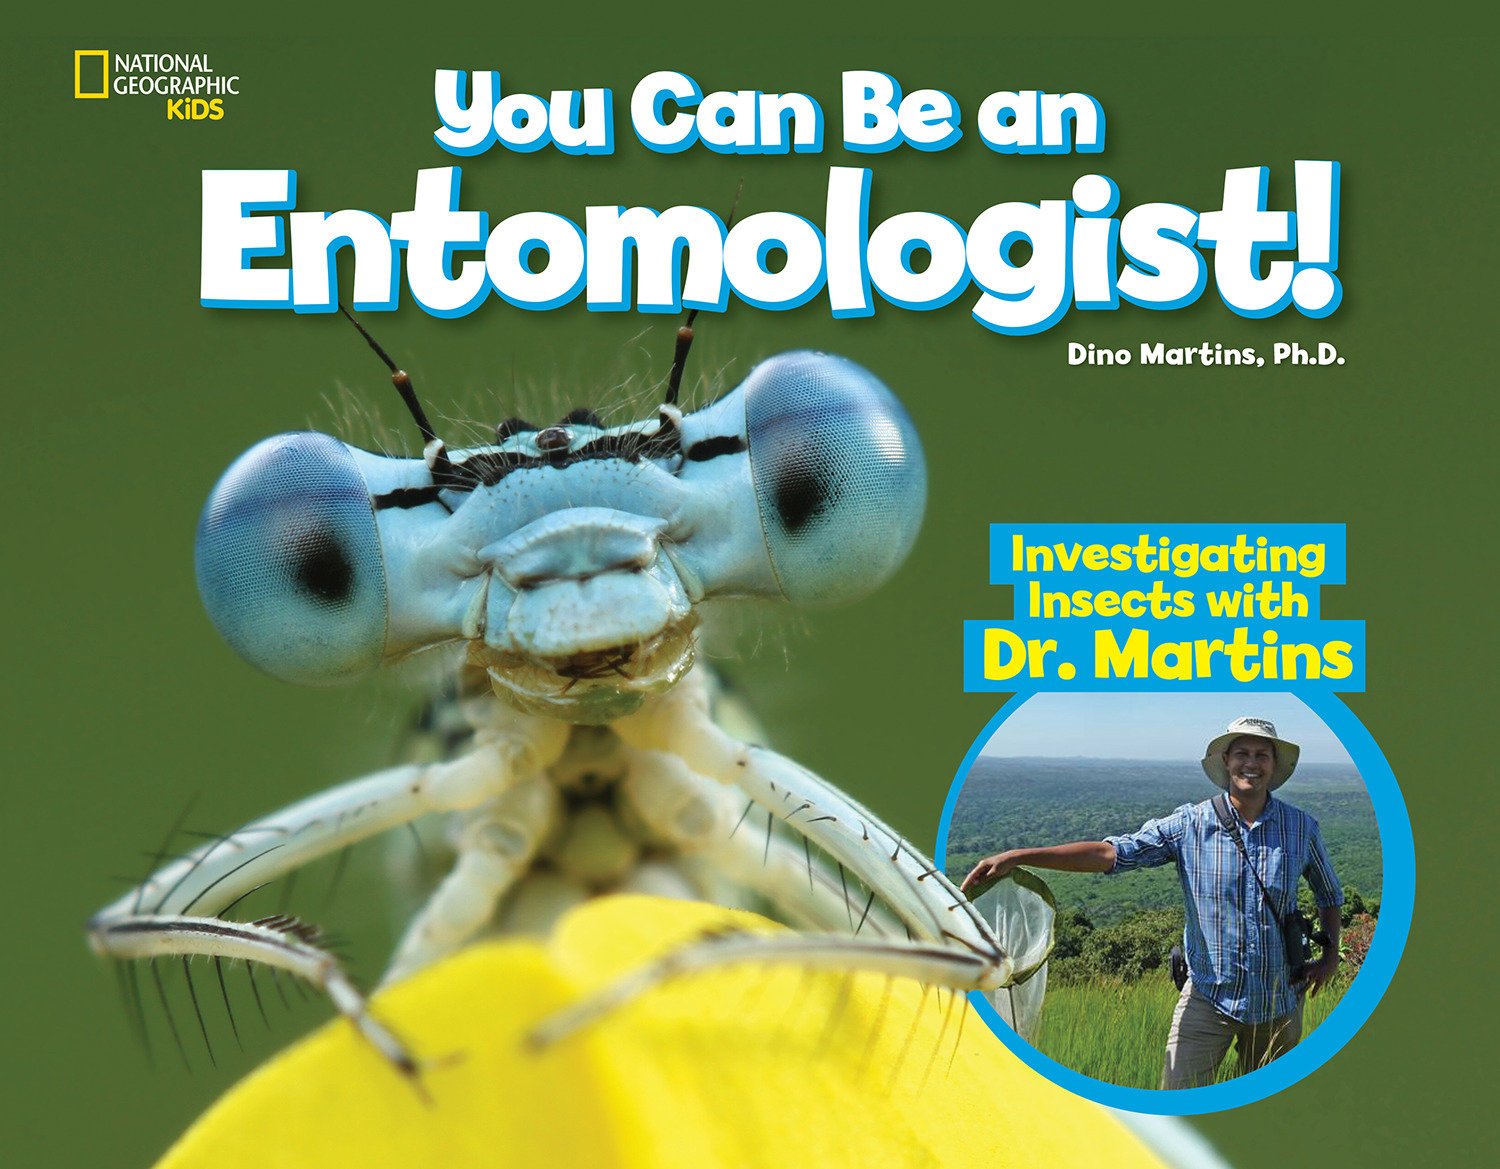 "You Can Be An Entomologist!" by Dr. Martins